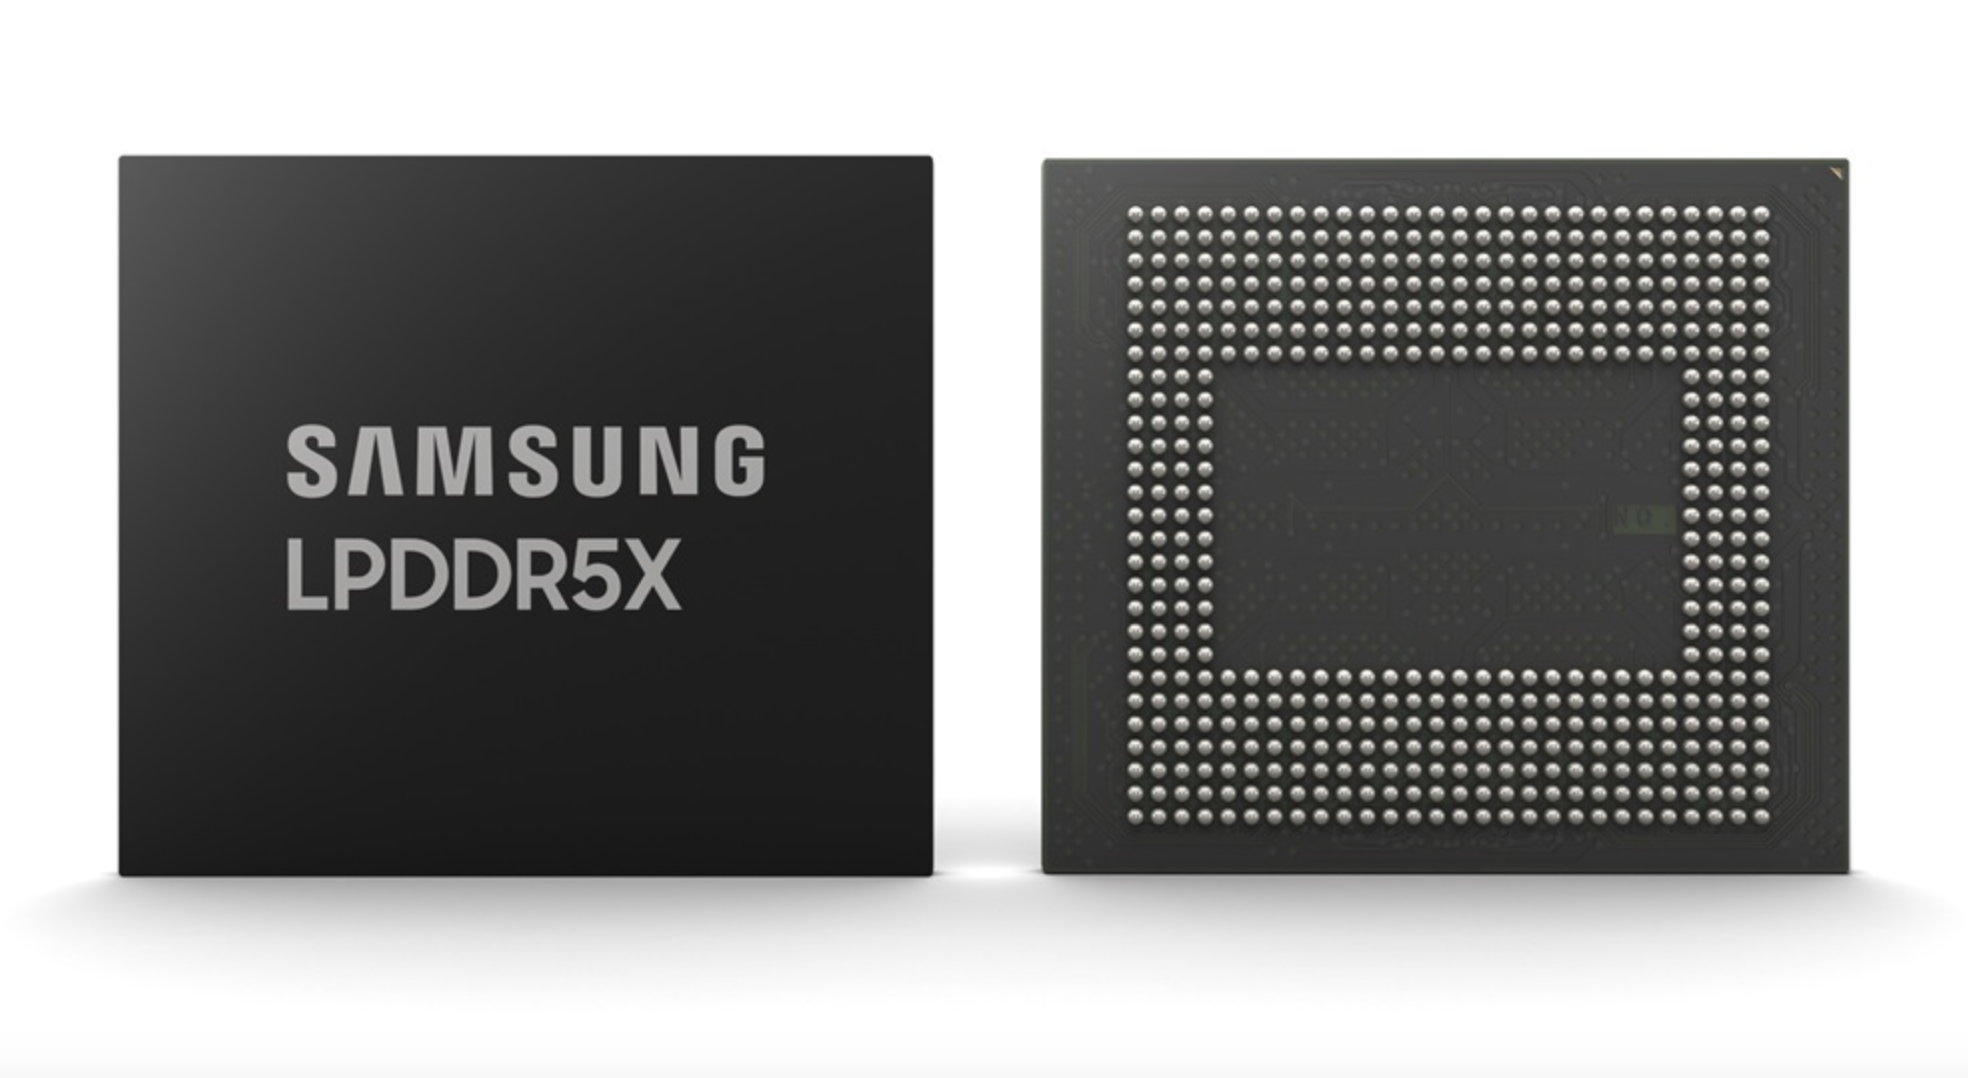 Samsung Says its New LPDDR5X DRAM is the Fastest One Yet [Video]